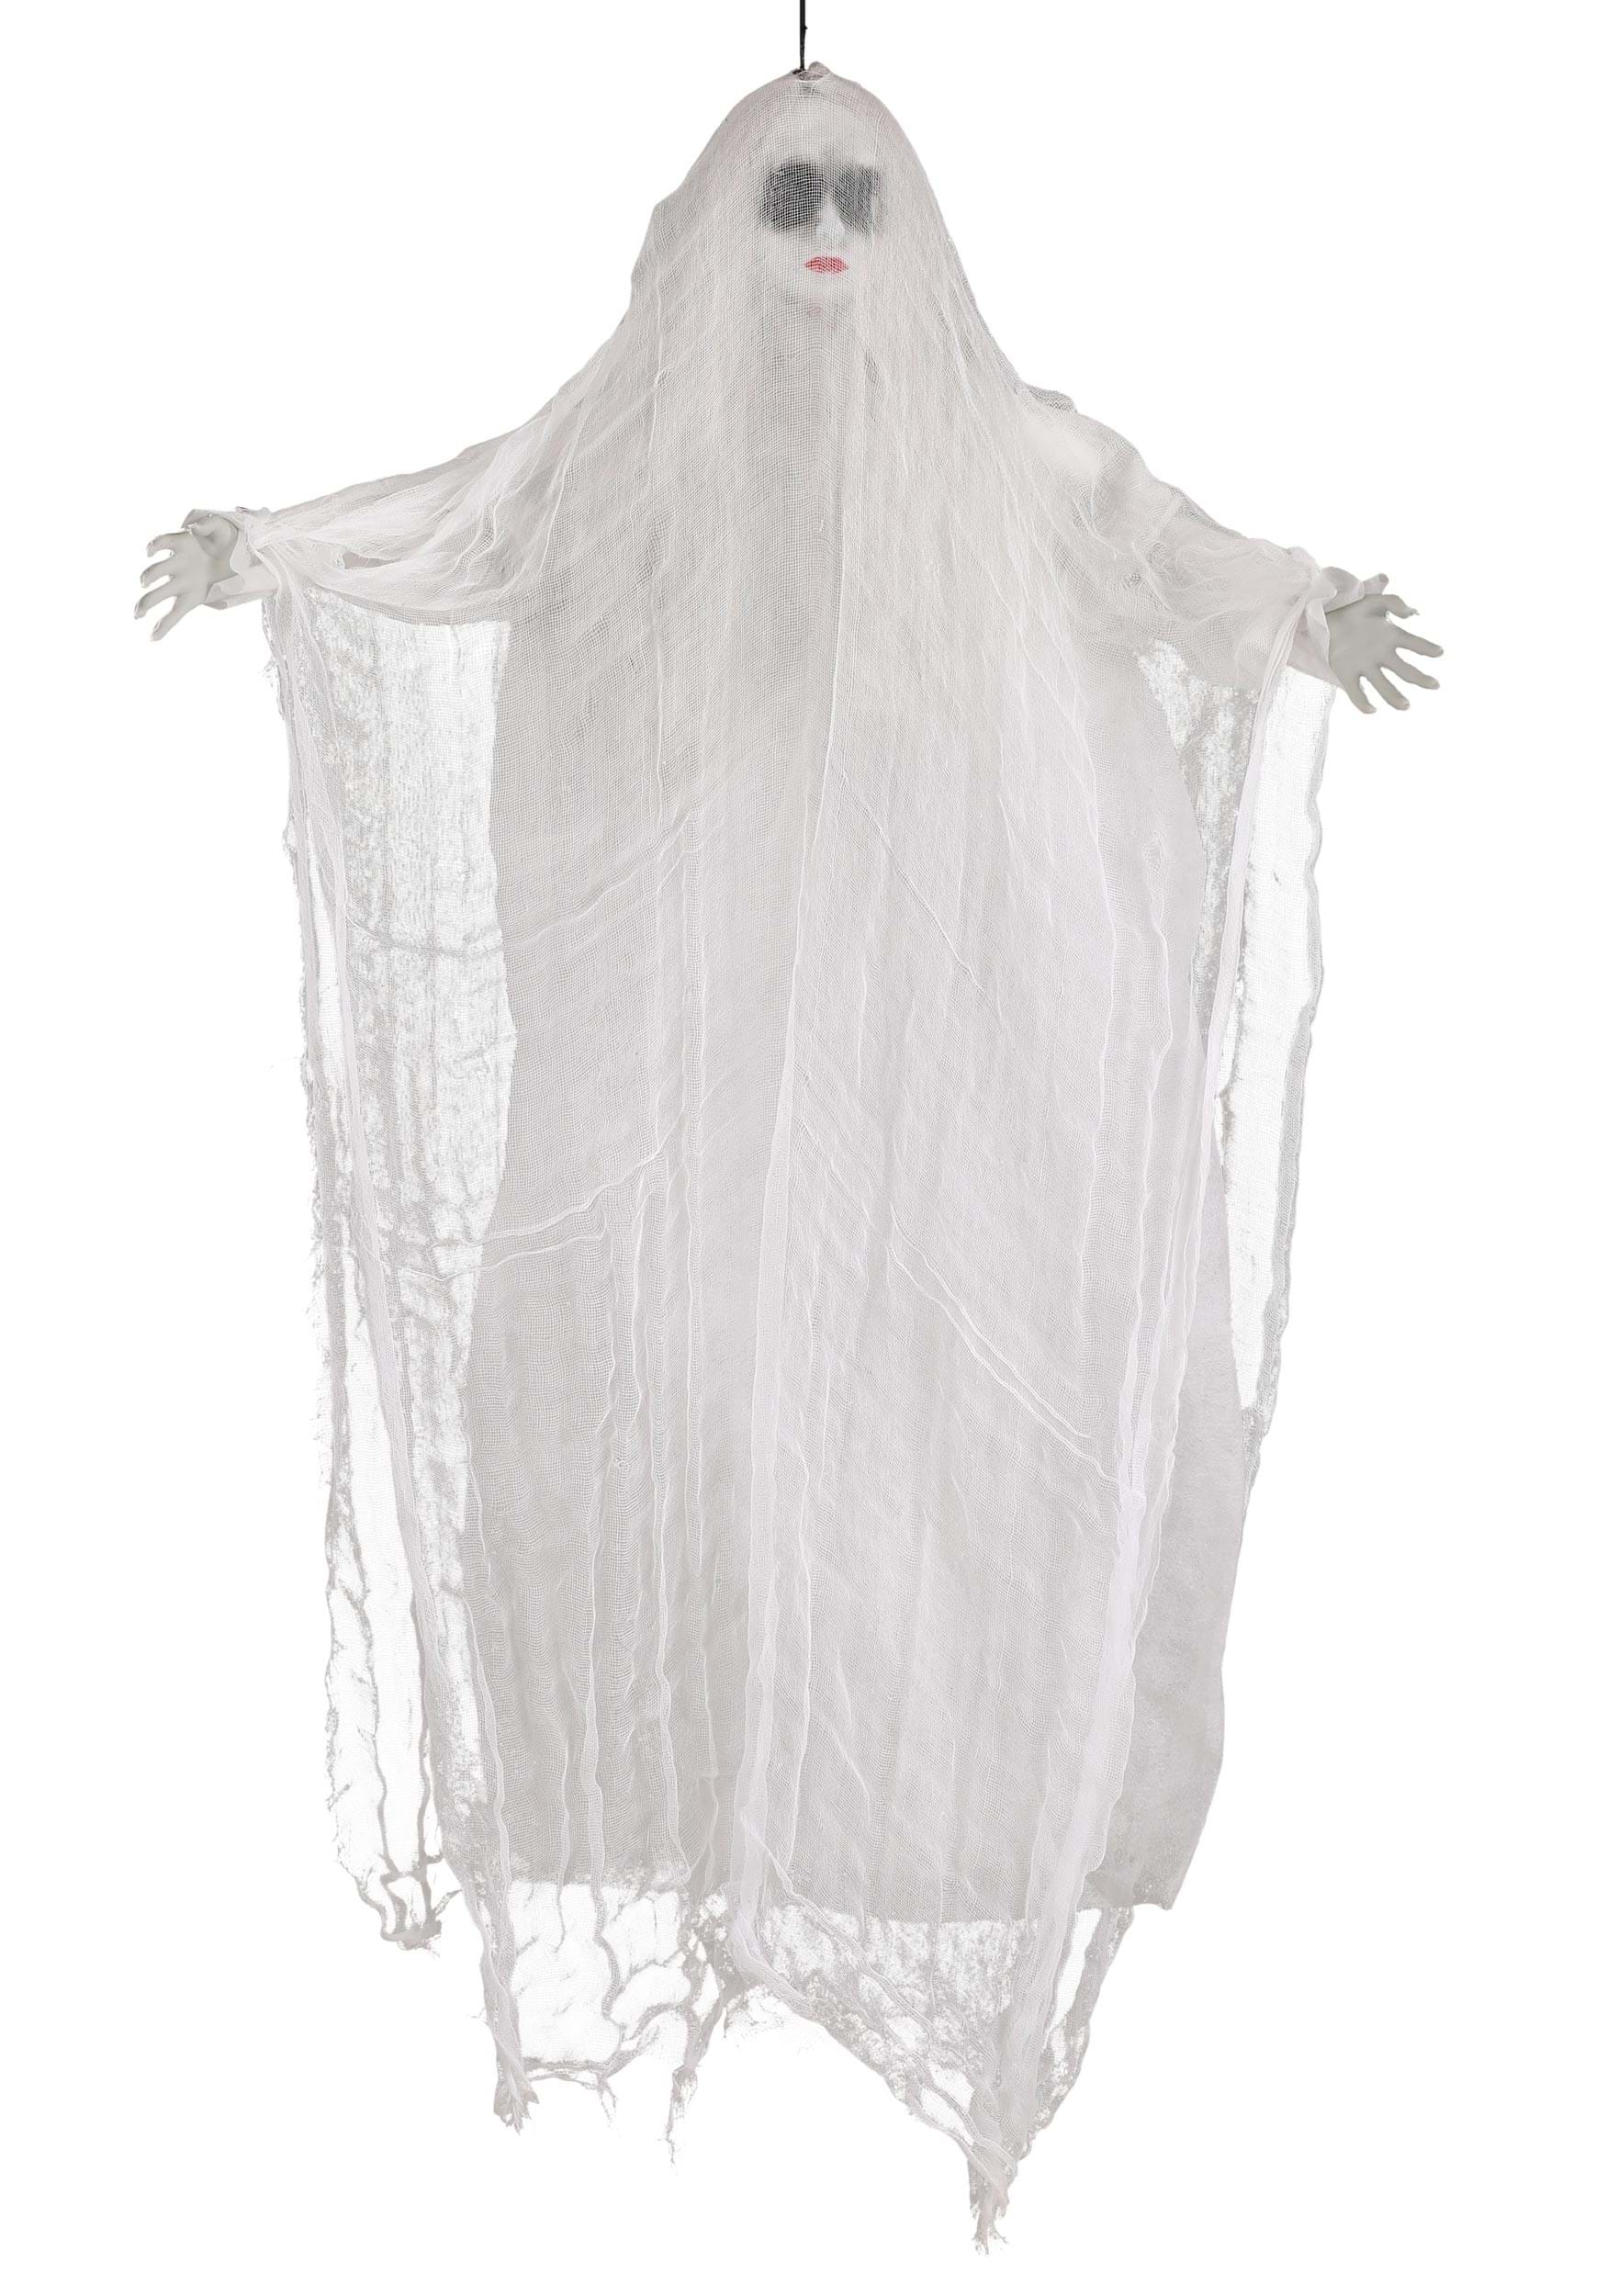 3 Foot Female Ghost Hanging Prop | Ghost Decorations